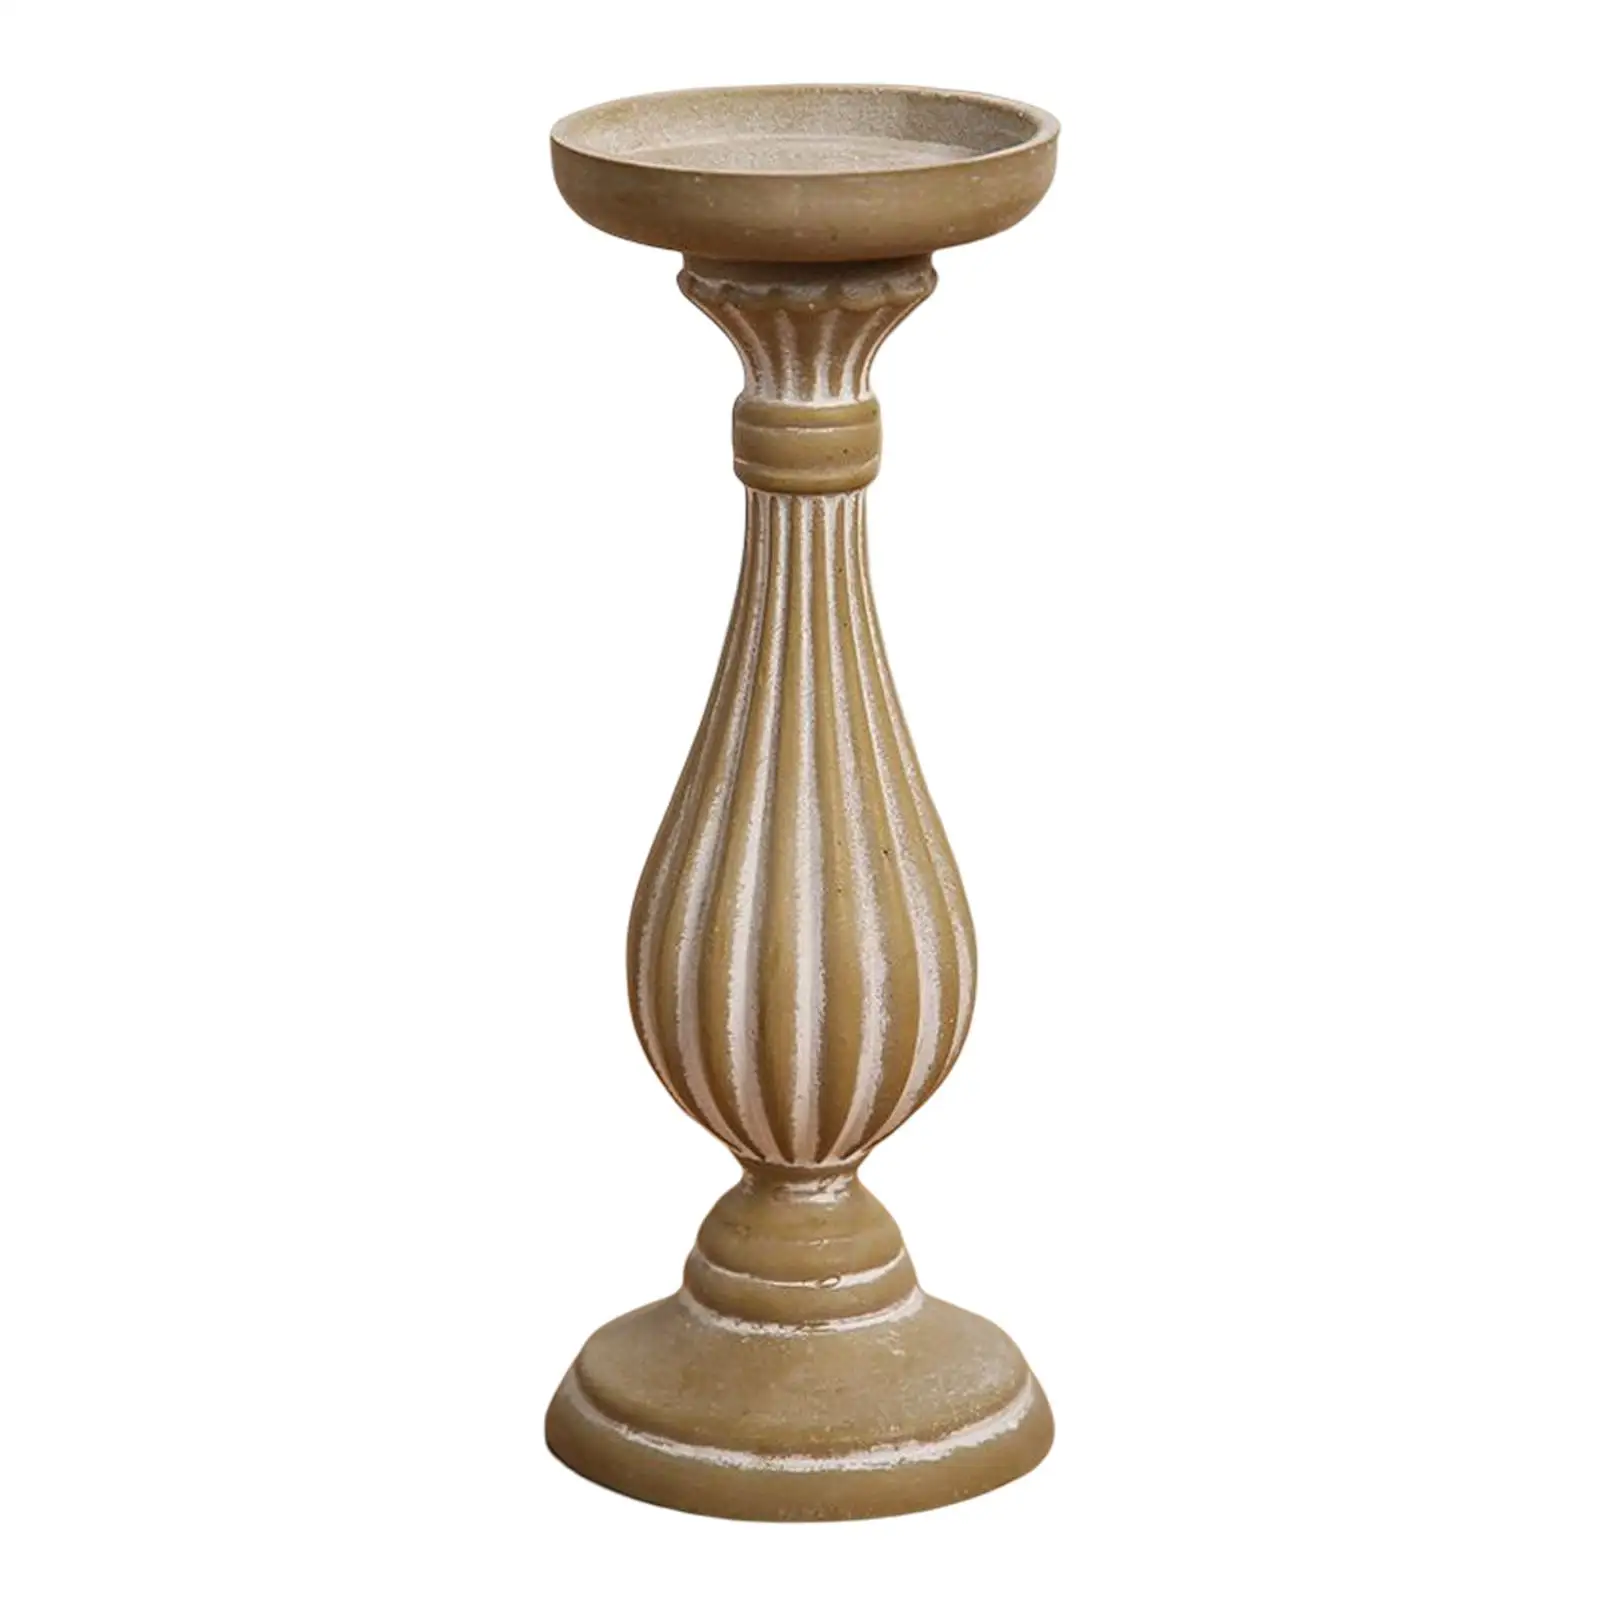 Candle Holder Table Centerpiece Plinth Base for Scenery Living Room Layout